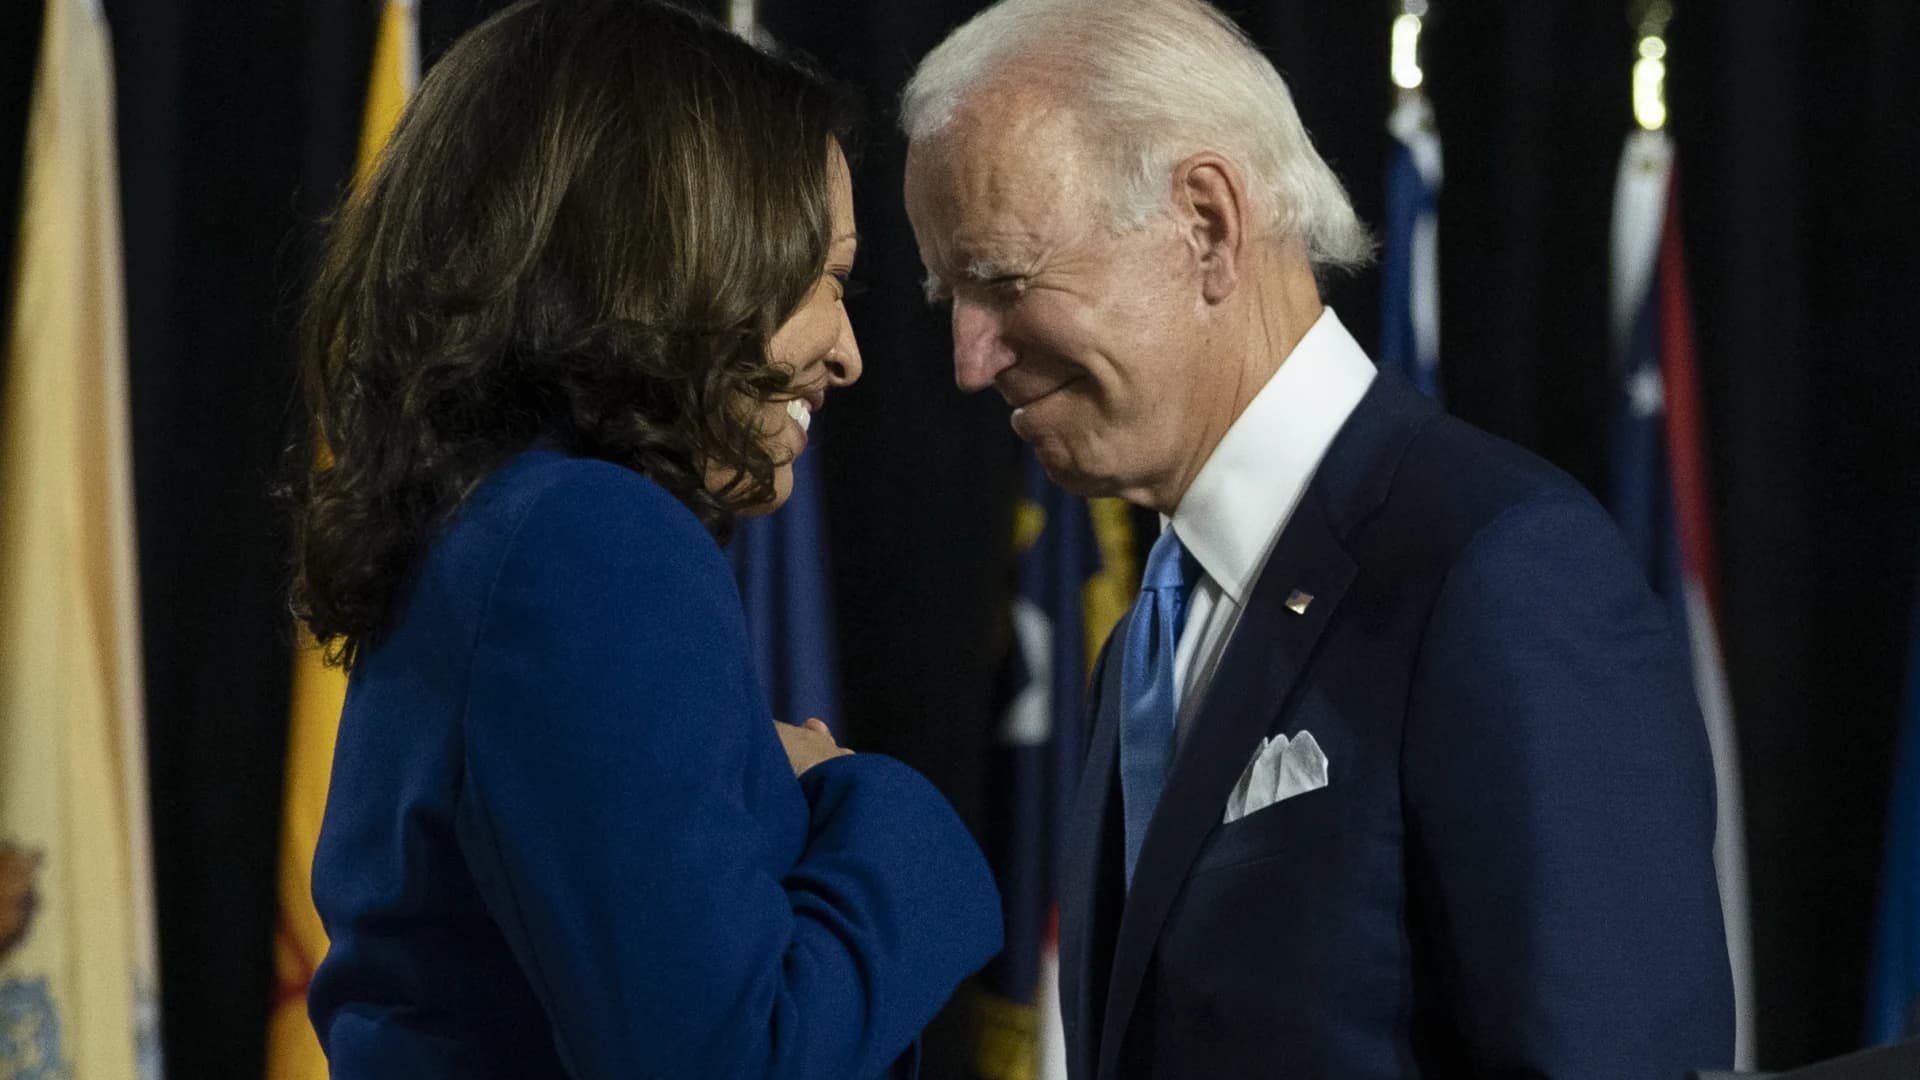 Local lawmakers, politicians take to social media after election is called for Biden